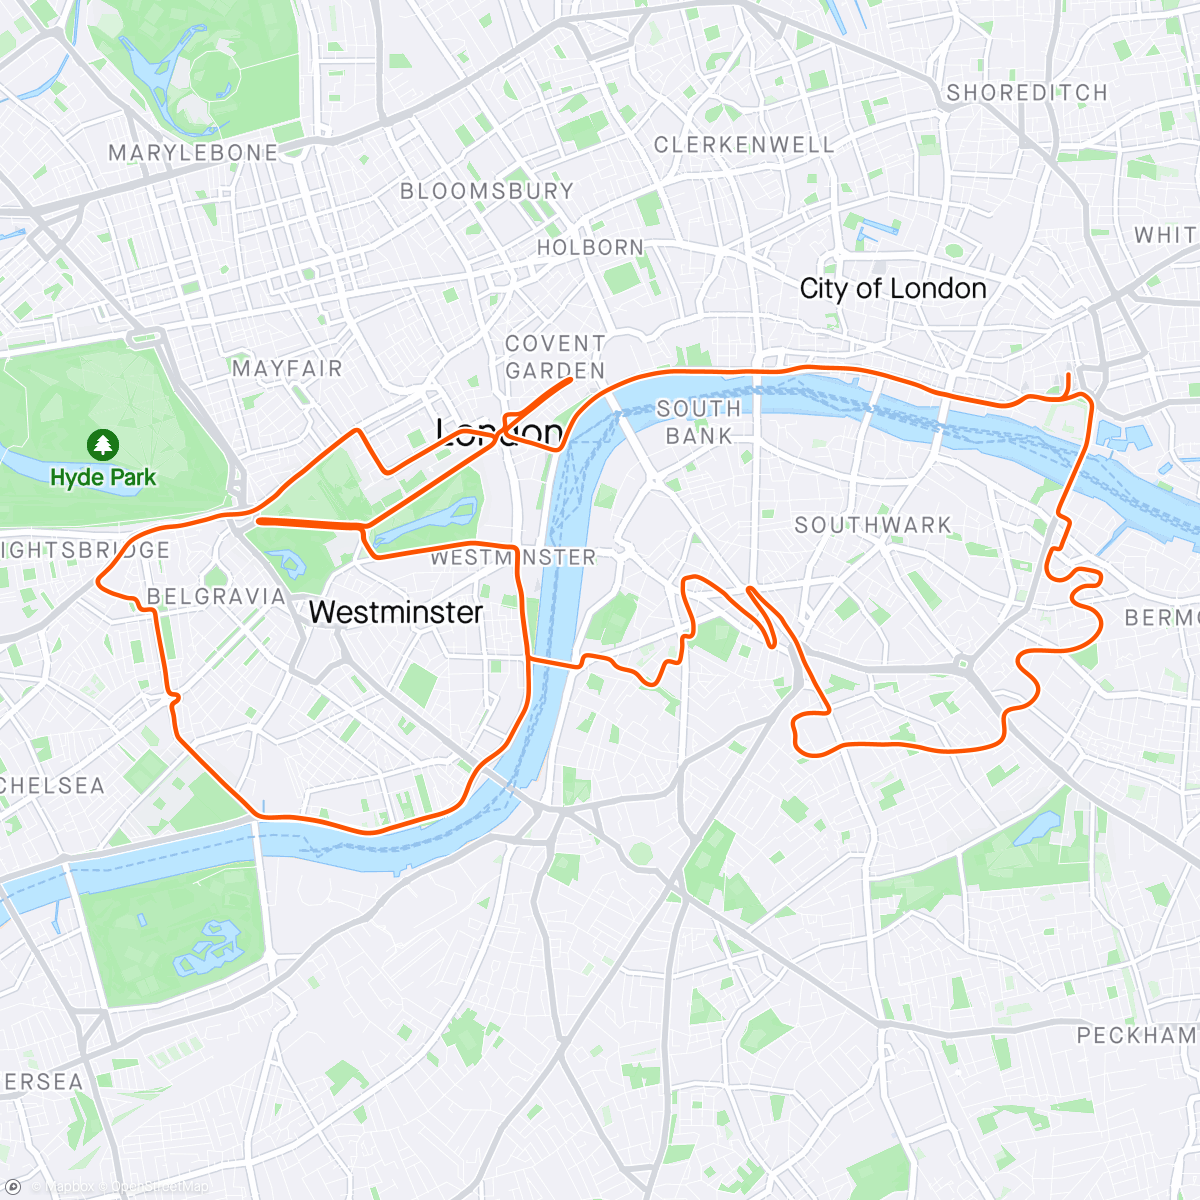 「Zwift - Group Ride: PACK SUB2 Saturday + KOM After Party (D) on Greater London Flat in London」活動的地圖